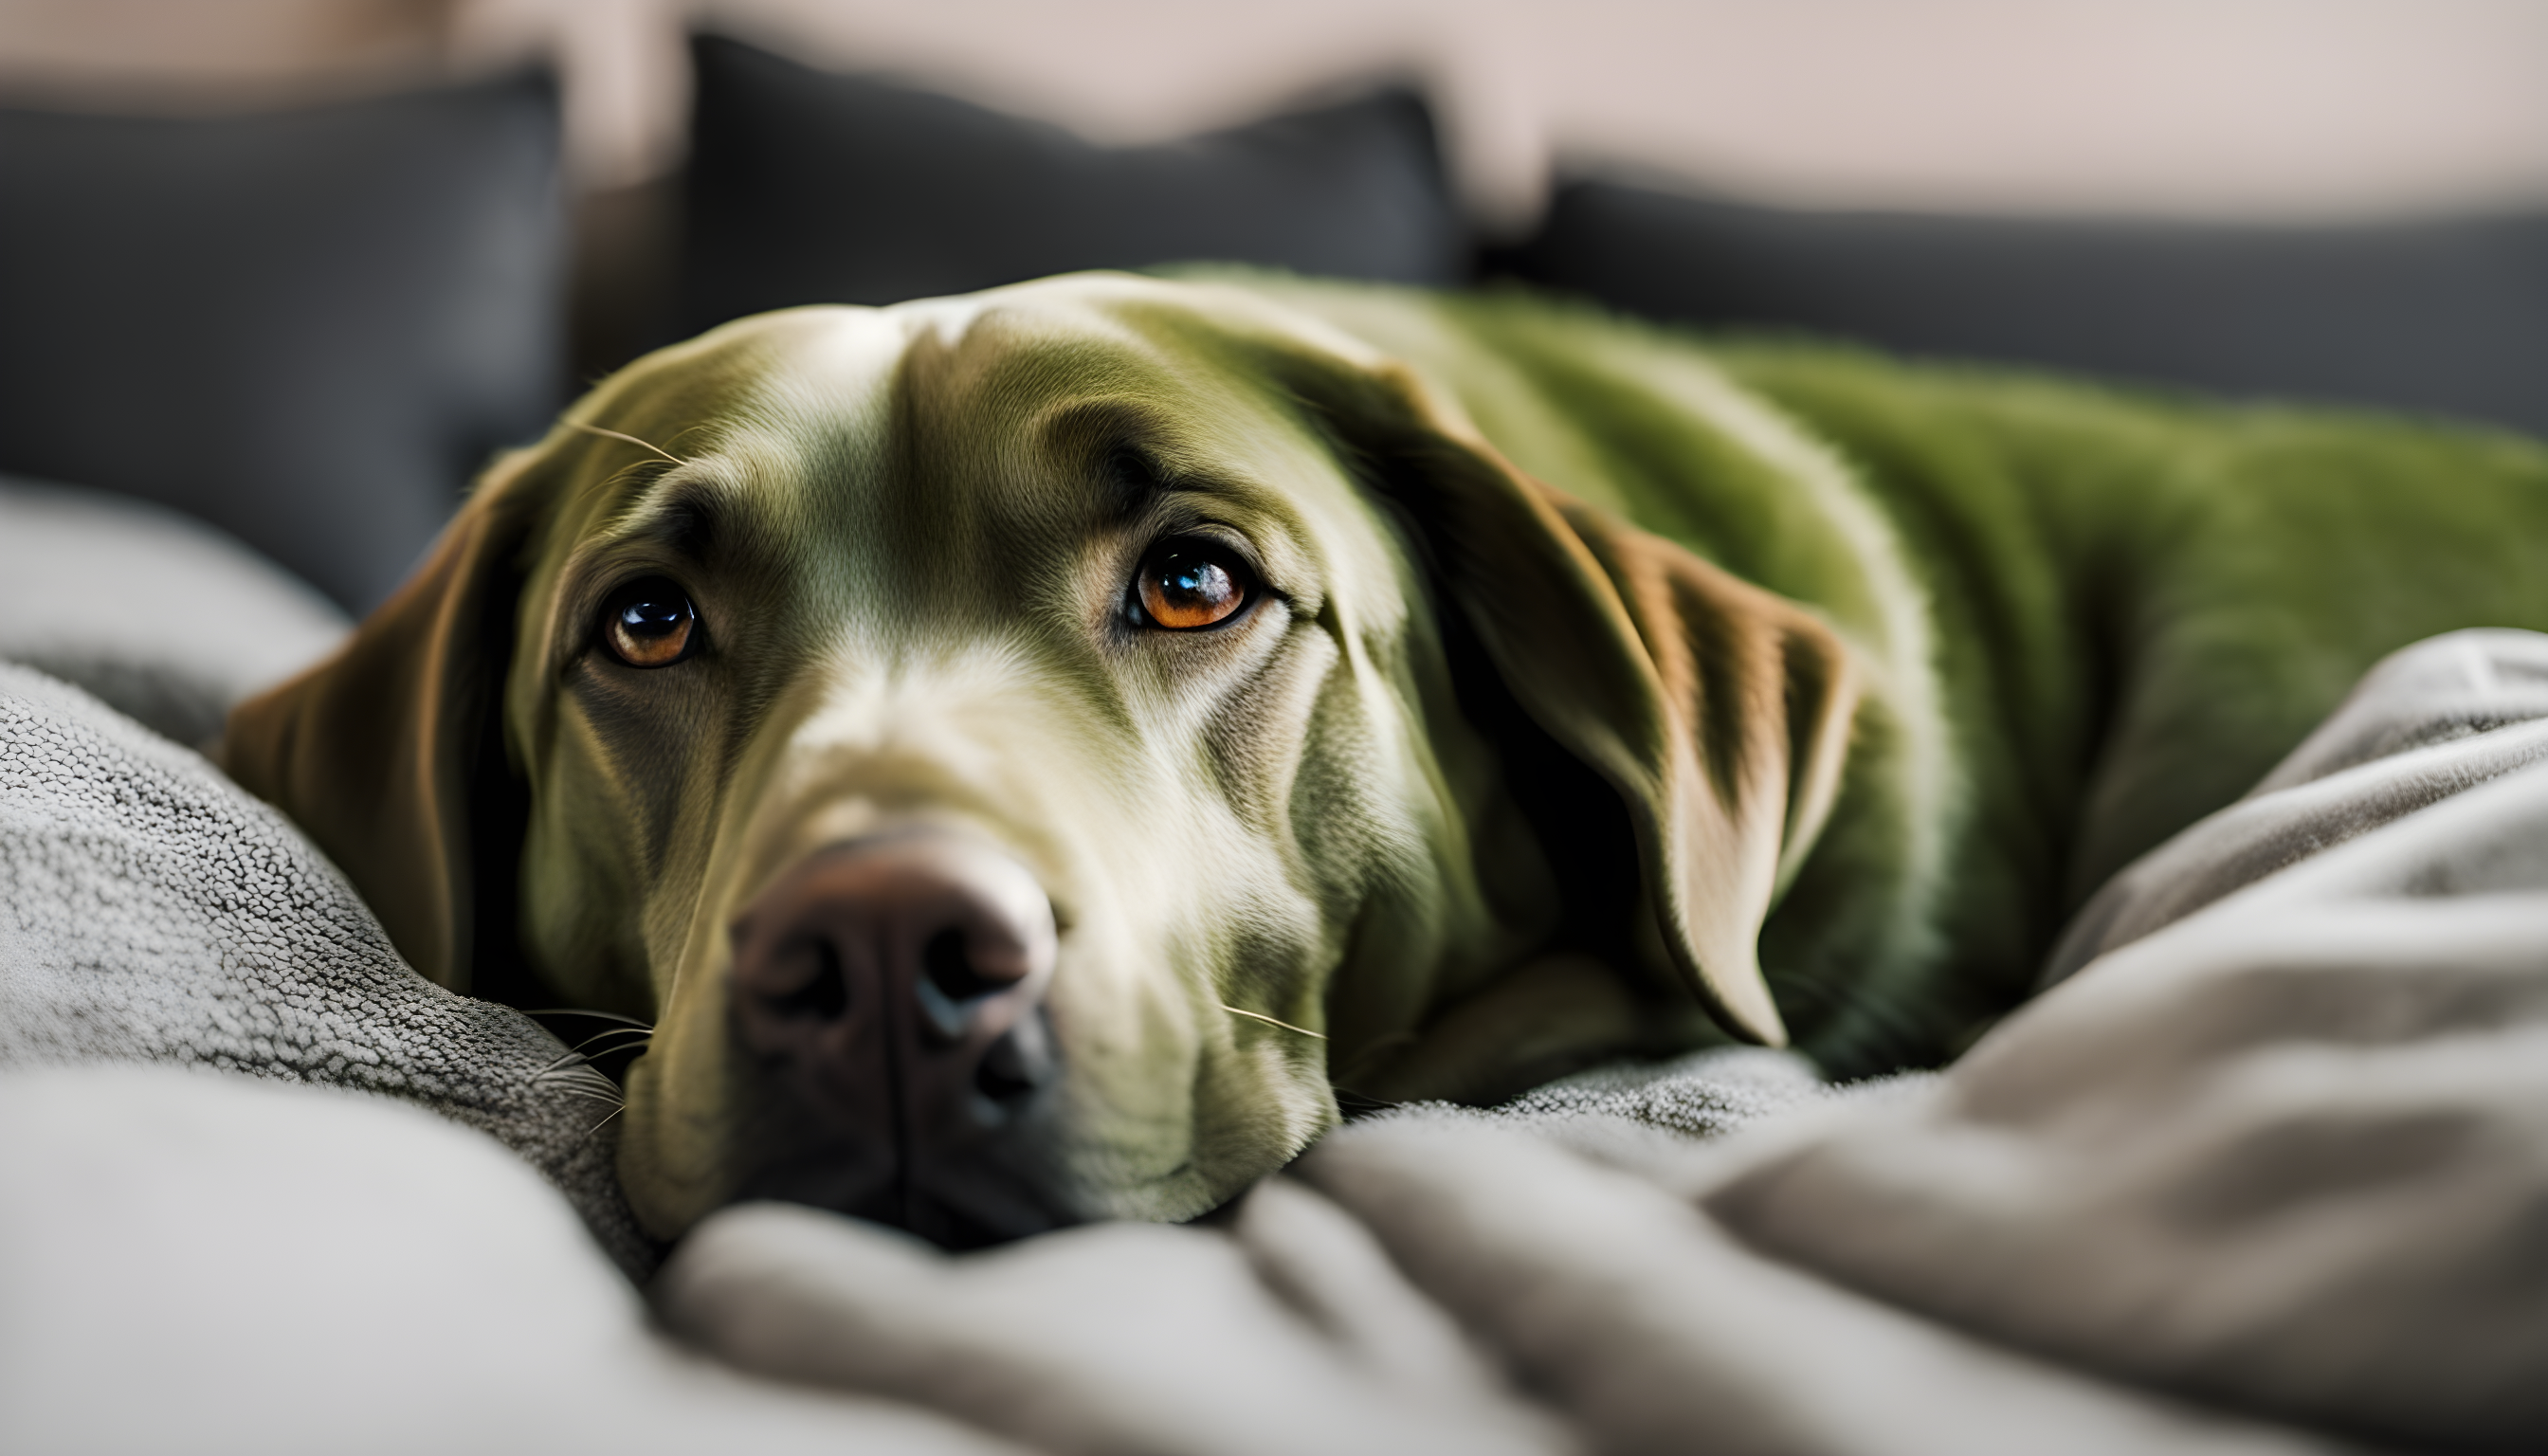 A Green Lab cuddled up with the fam on a lazy Sunday, looking so comfy that you wish you could join the snuggle fest.